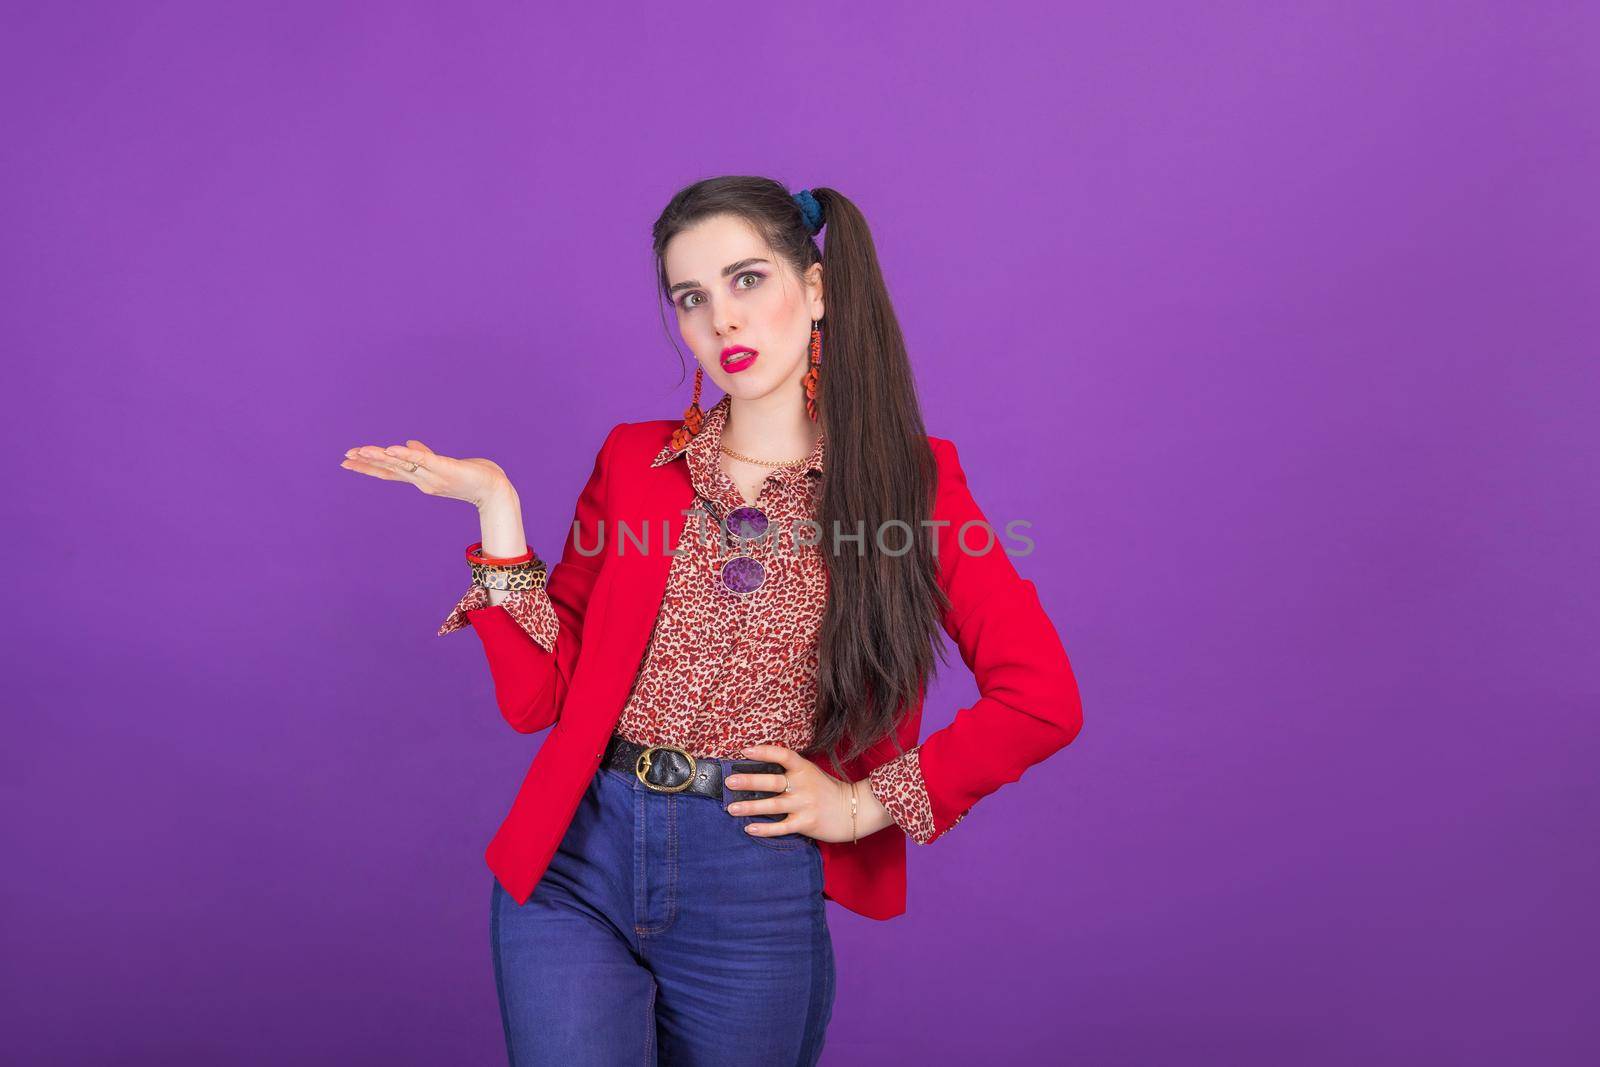 Retro fashion 90s 80s young woman in red jacket portrait, palm up gesture with copy space.